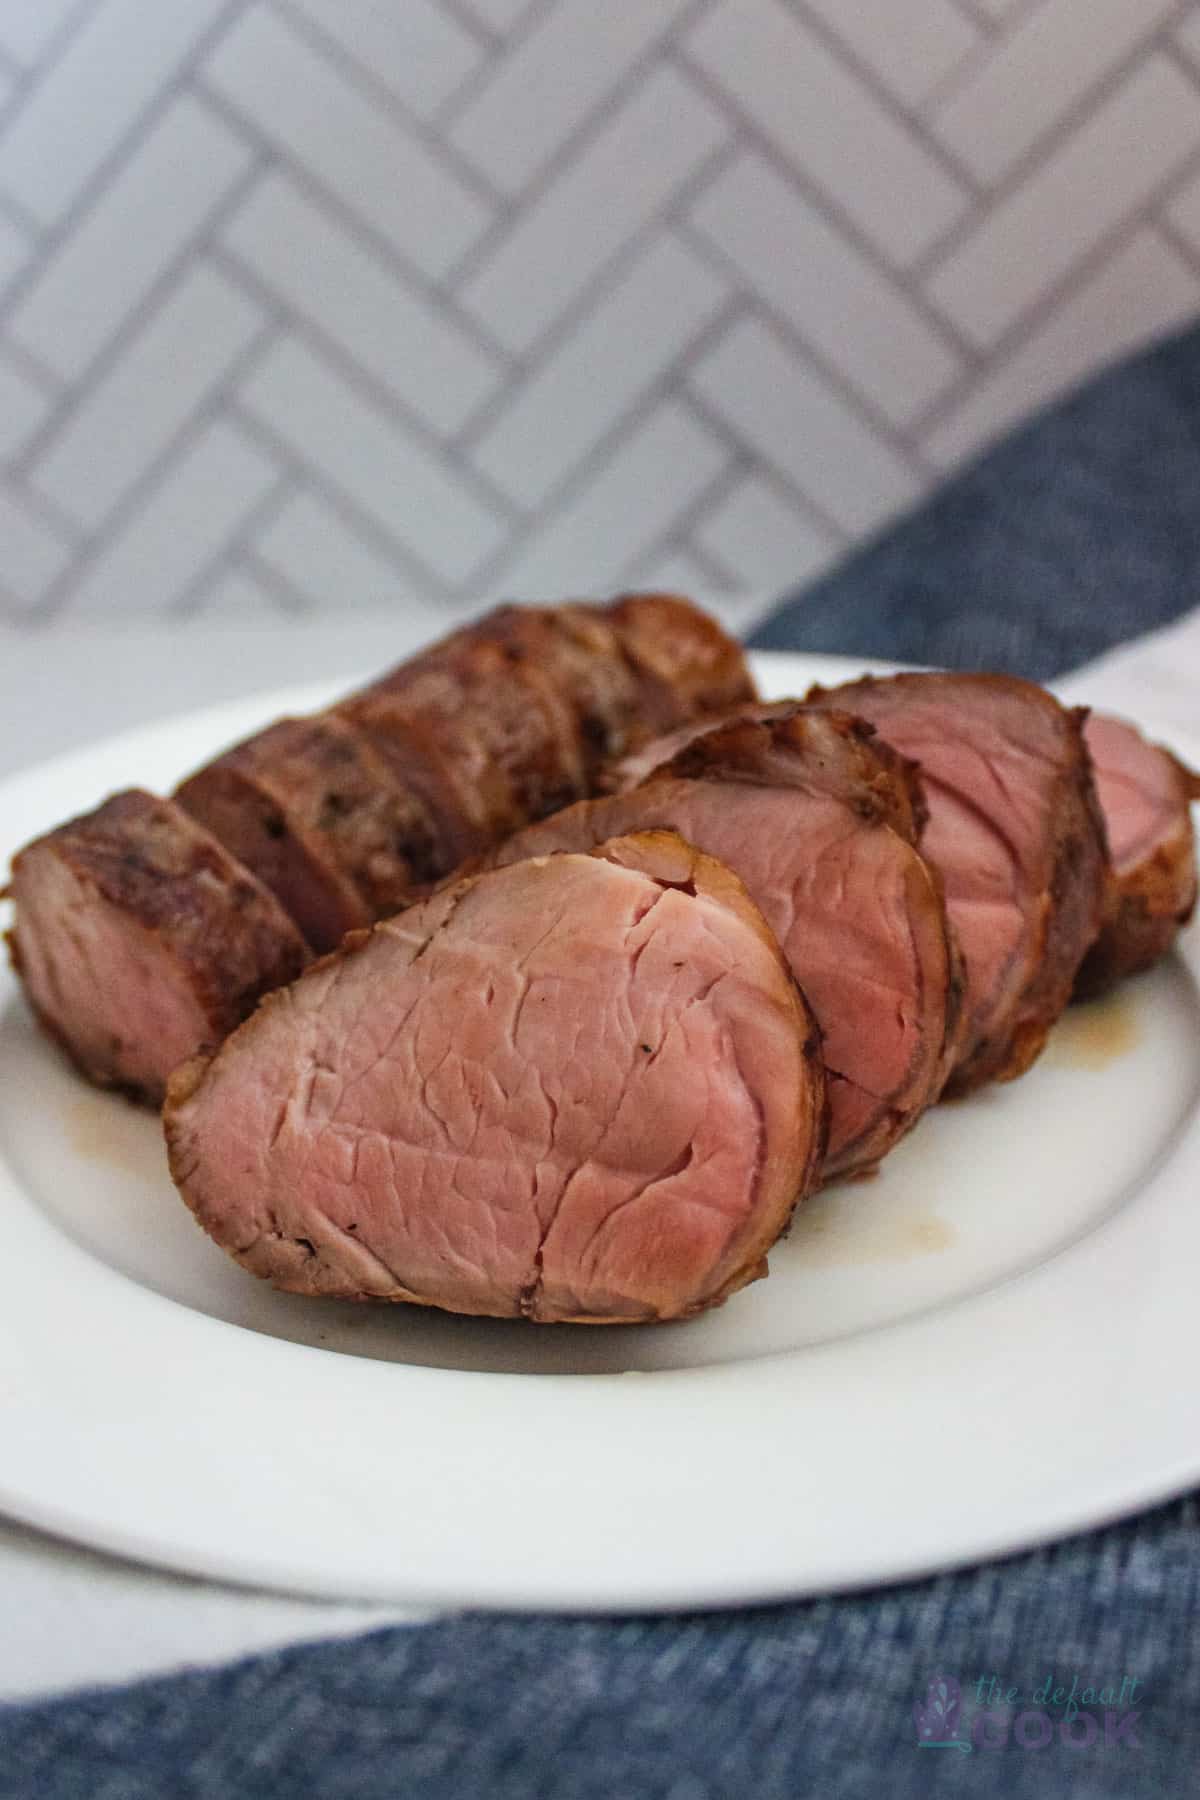 A pork tenderloin sliced and presented on a white plate with a kitchen towel below it.